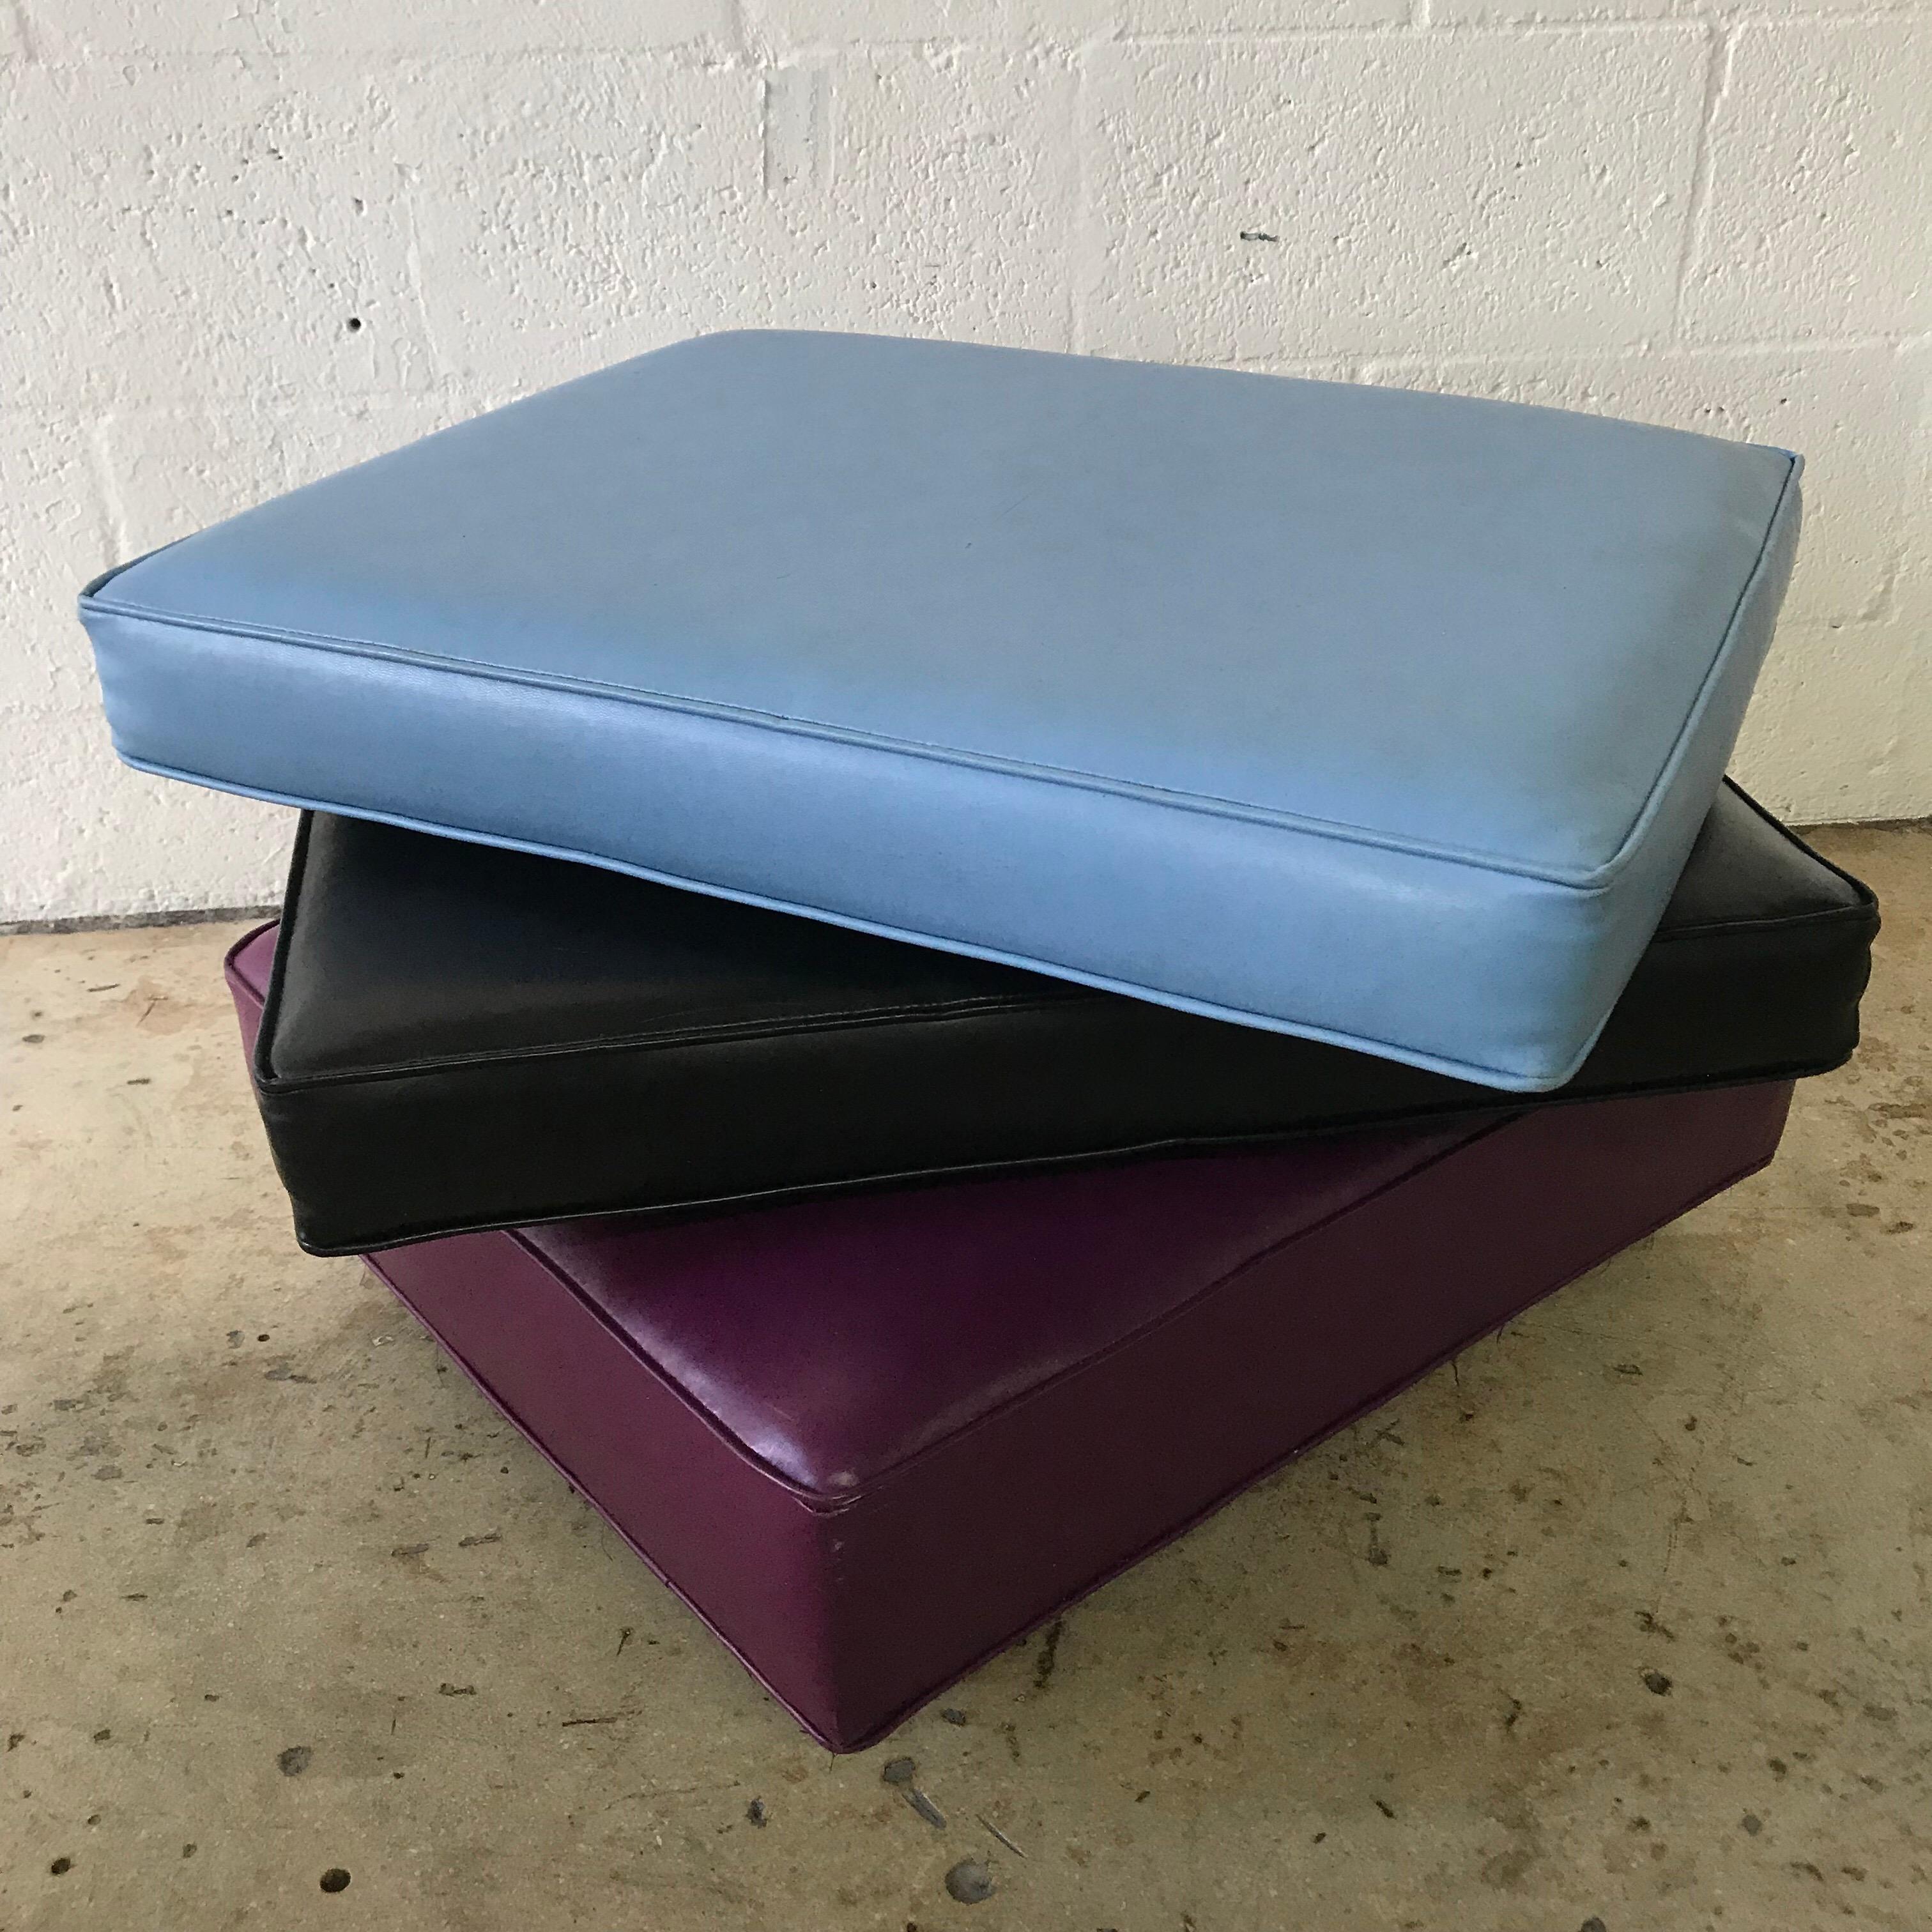 Vintage midcentury rolling ottoman floor cushion set rendered in 3 colors of vinyl faux leather.